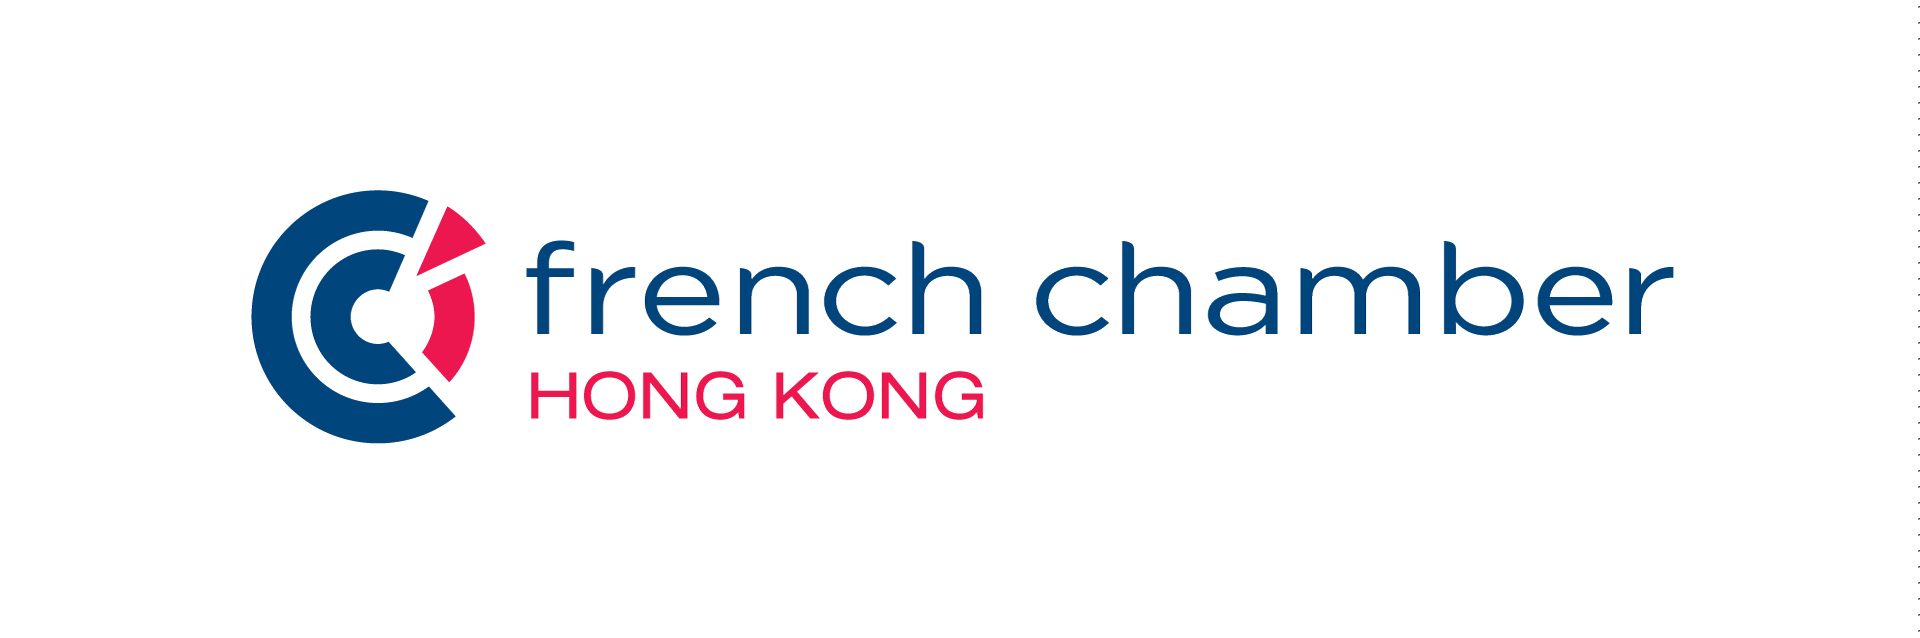 French Chamber of Commerce and Industry in Hong Kong